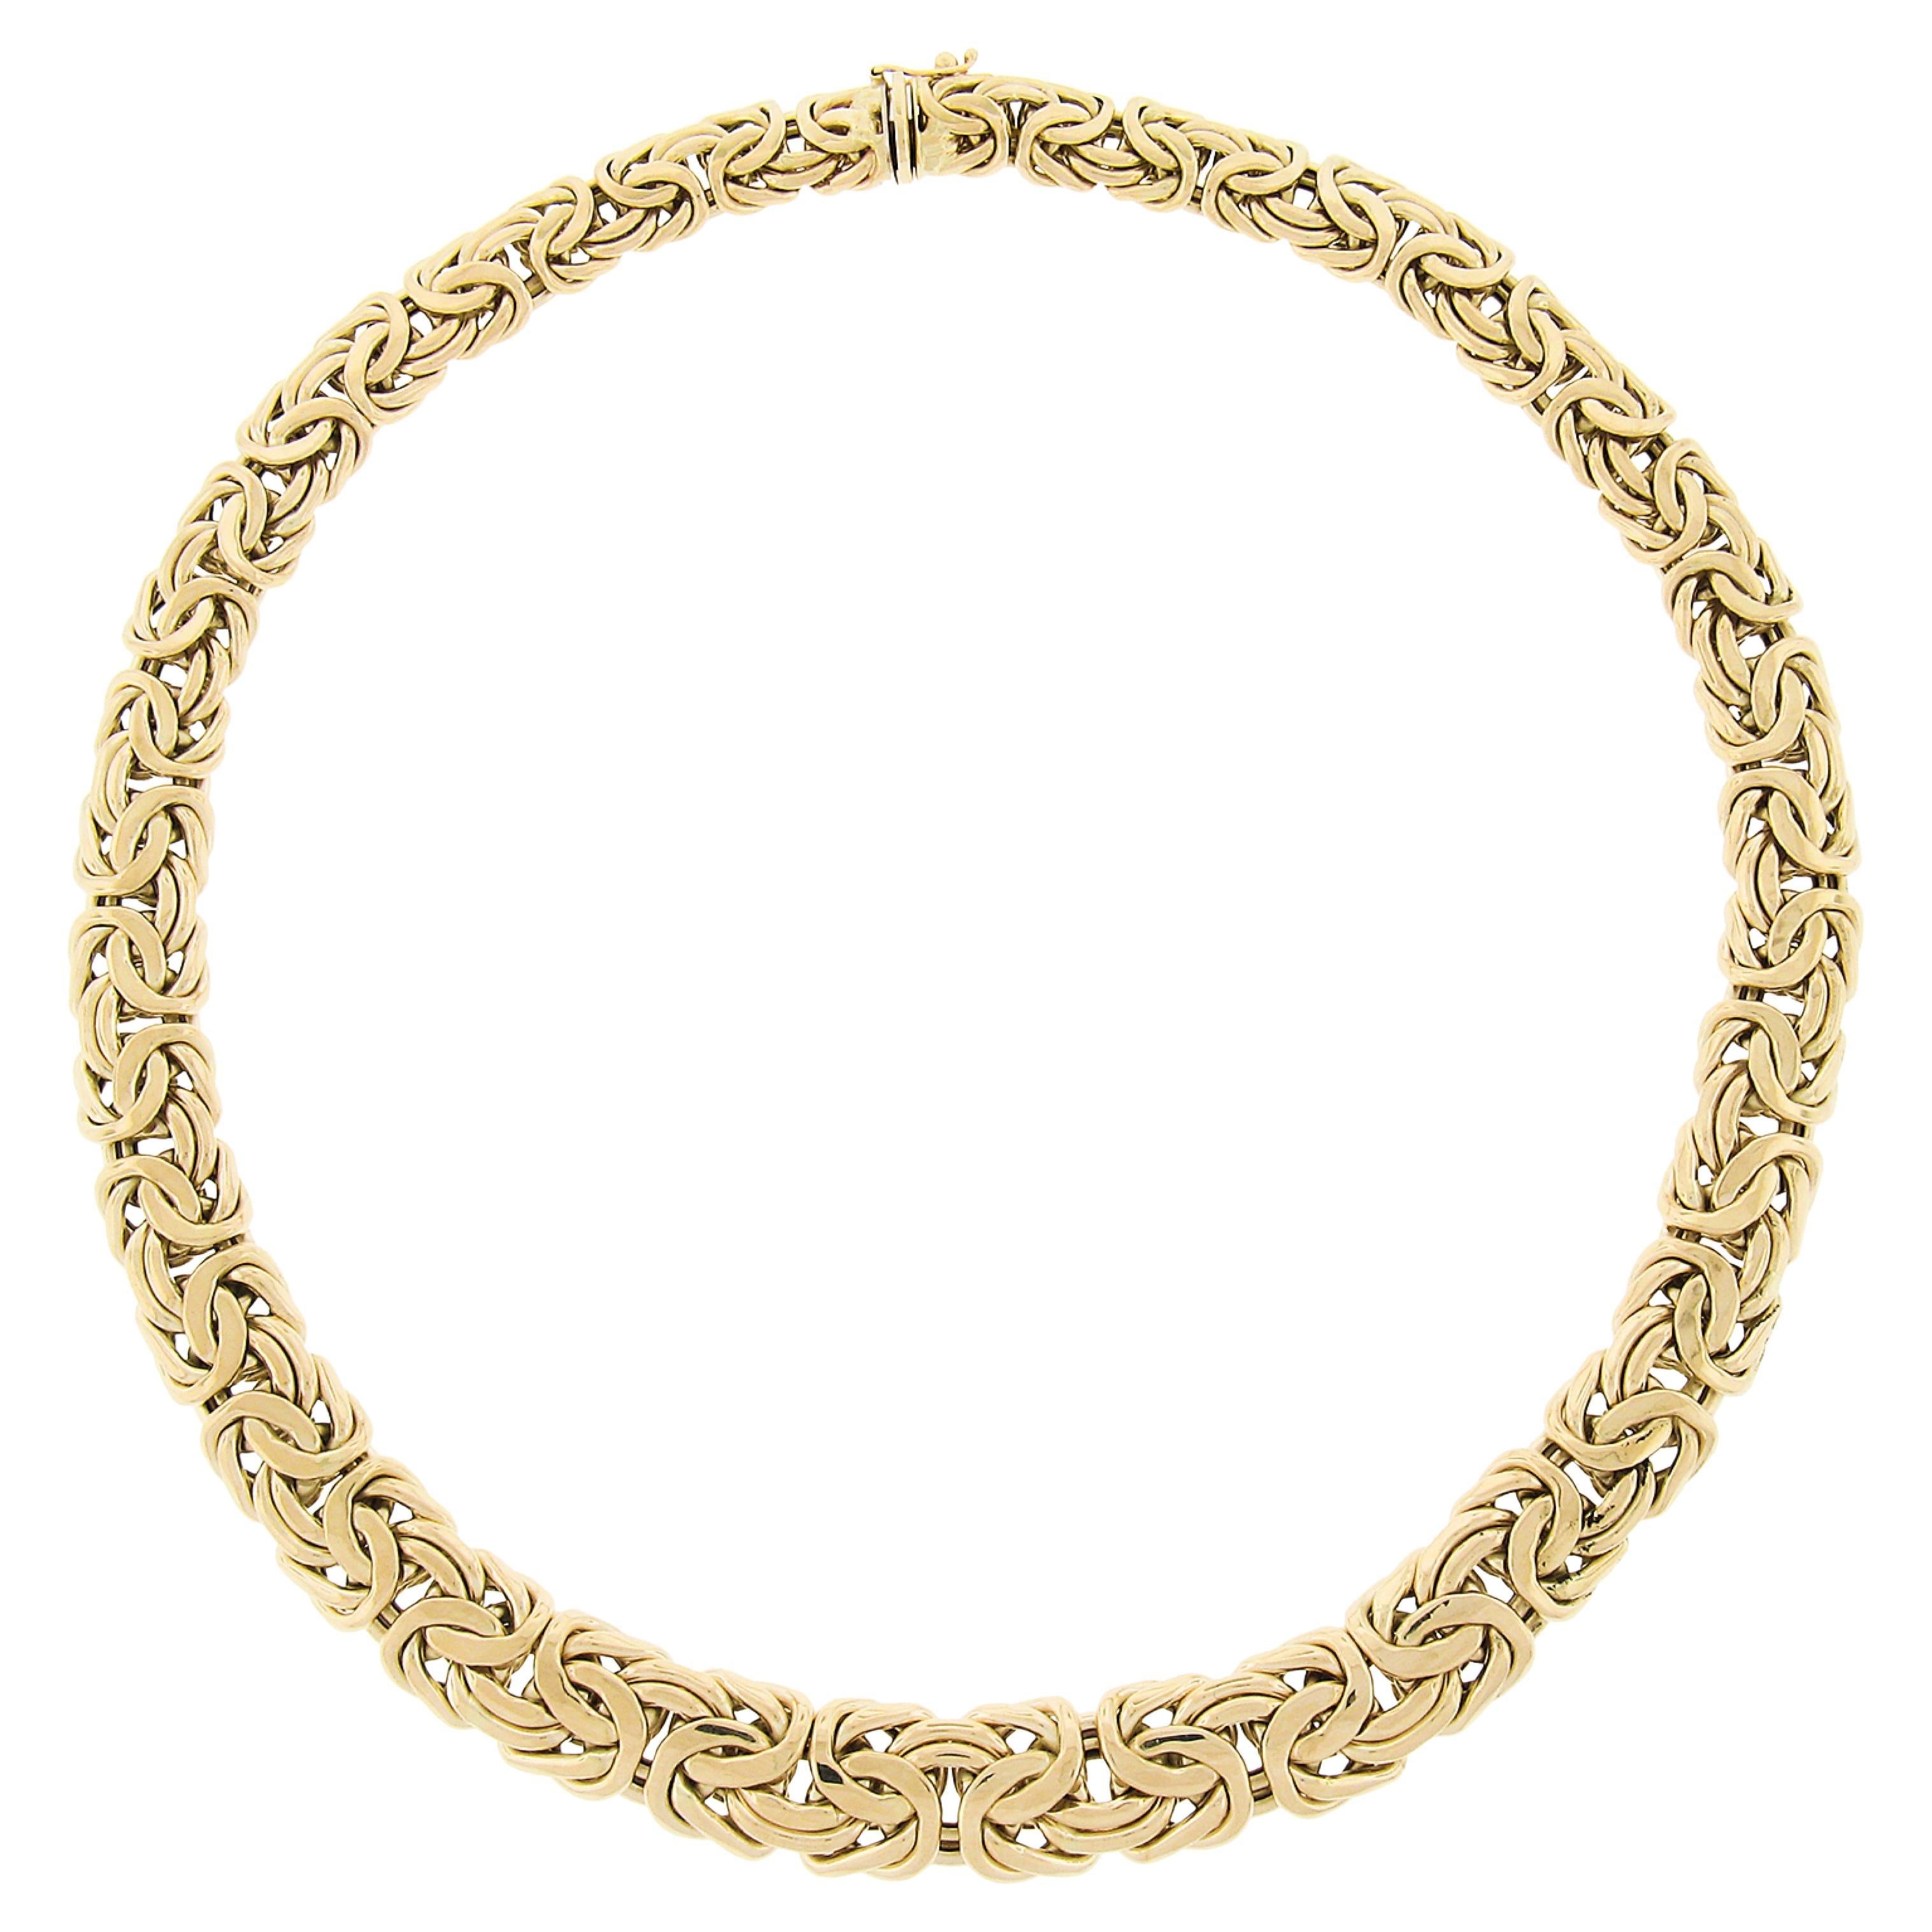 14k Gold Graduated Flat & Domed Byzantine Link Chain Necklace w/ Push Clasp